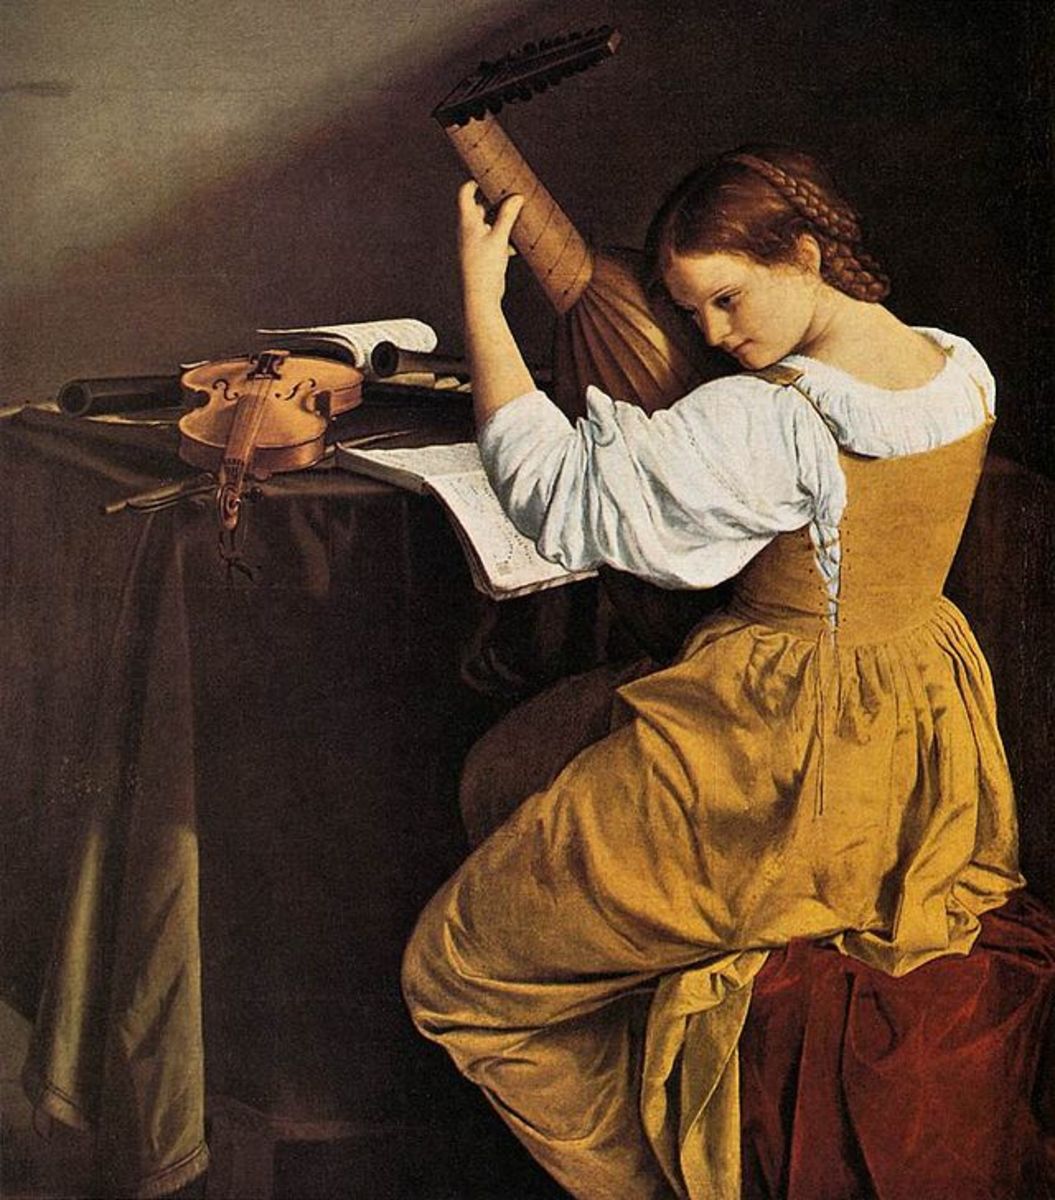 The Lute Player by Orazio Gentileschi (1563 - 1639) - a kirtle is a fitted bodice with a skirt that is worn over the gown. 